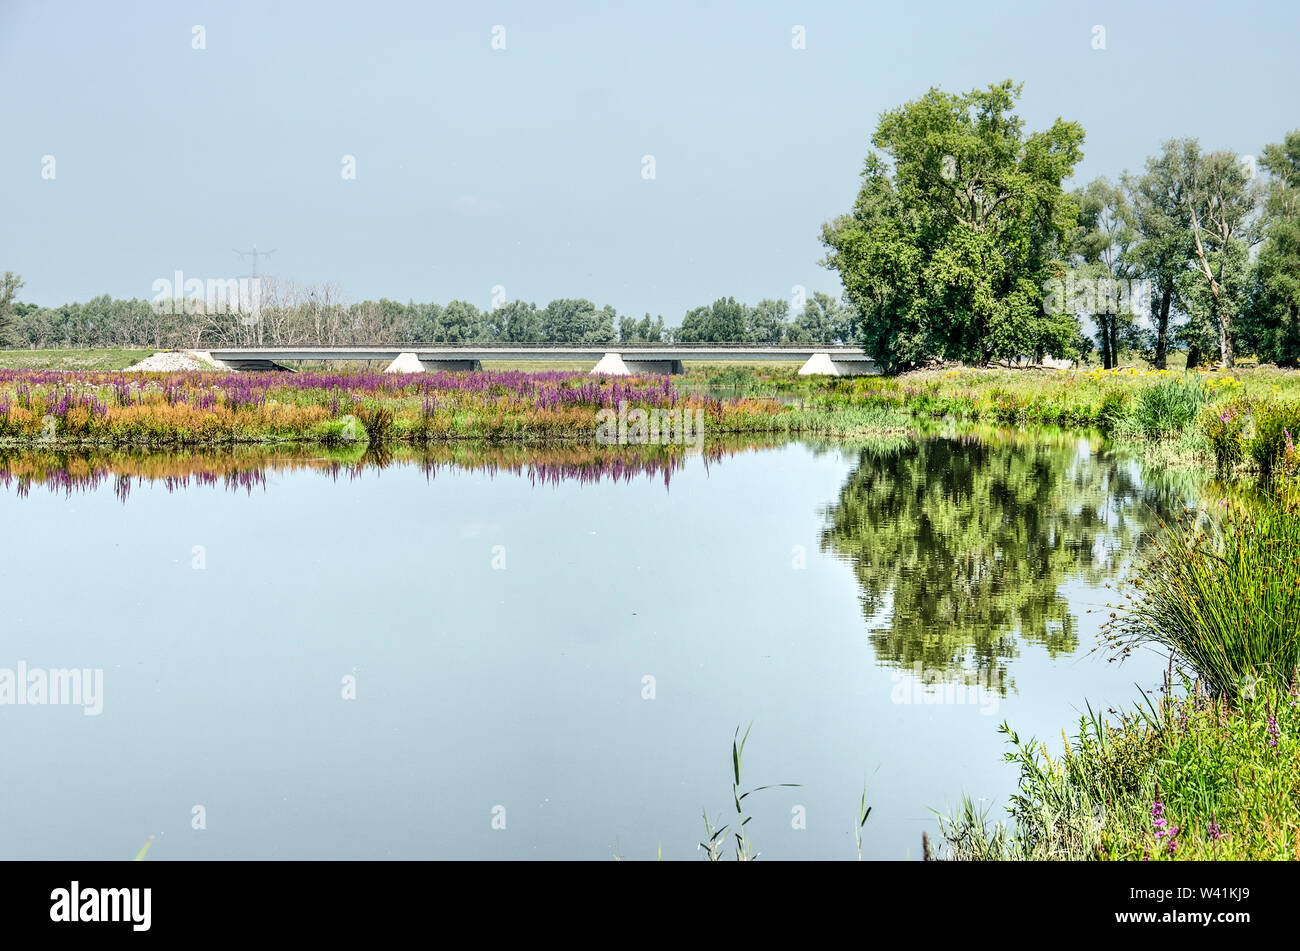 View across one of the creeks in the Noordwaard section of Biesbosch national park in the Netherlands towards fields of purple loosestrife and rumex, Stock Photo